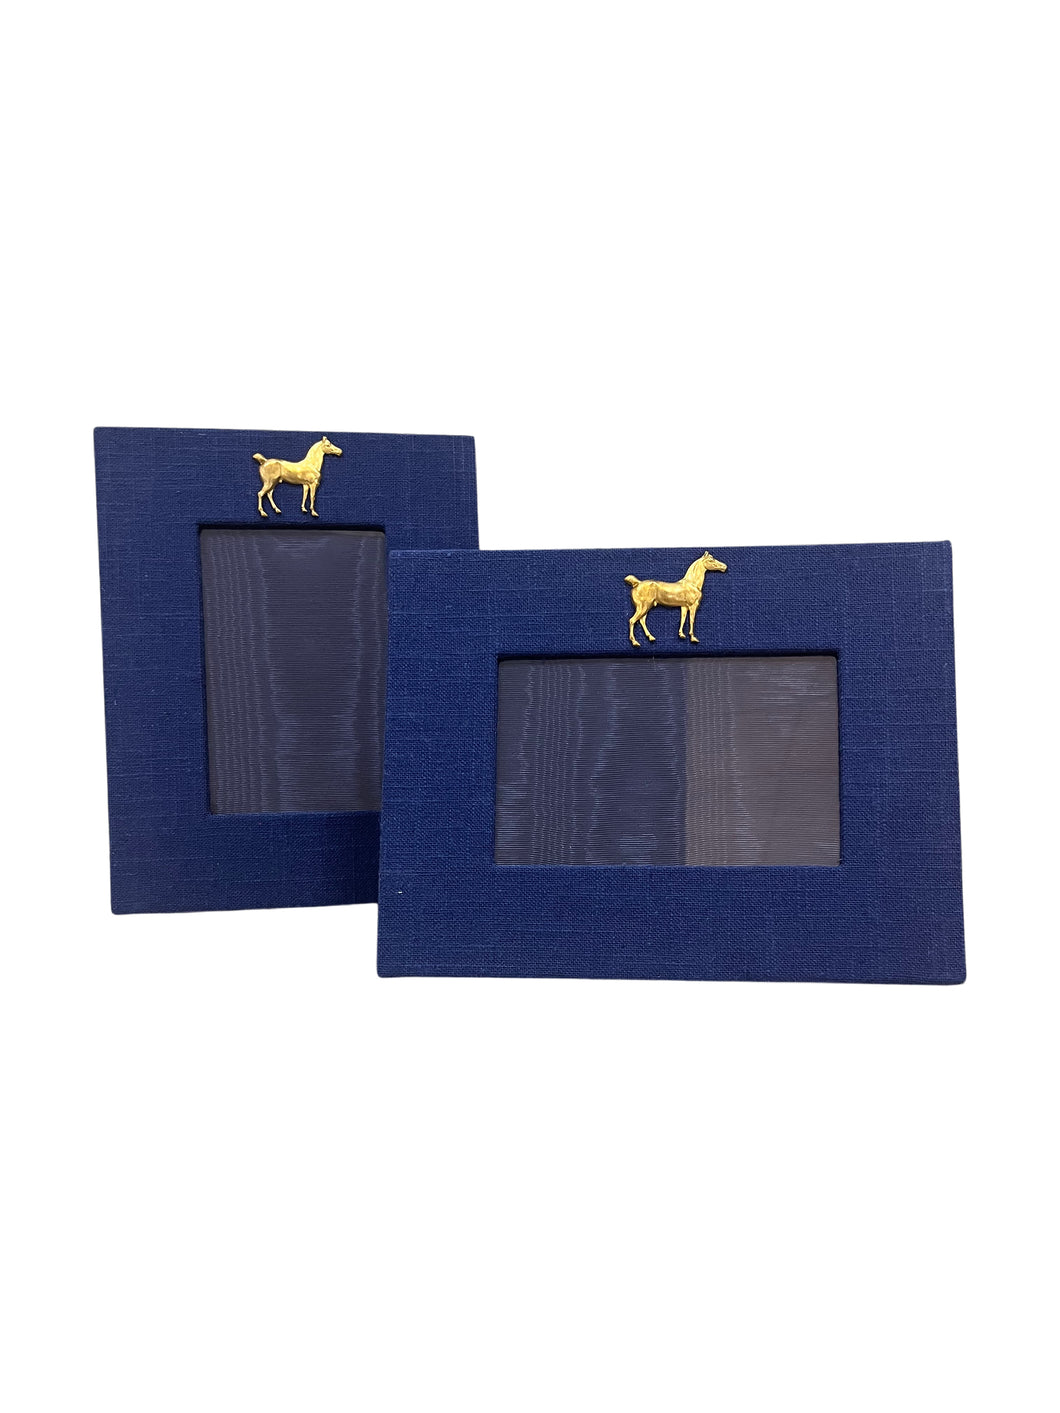 New Navy Linen with Horse Frame, 4x6